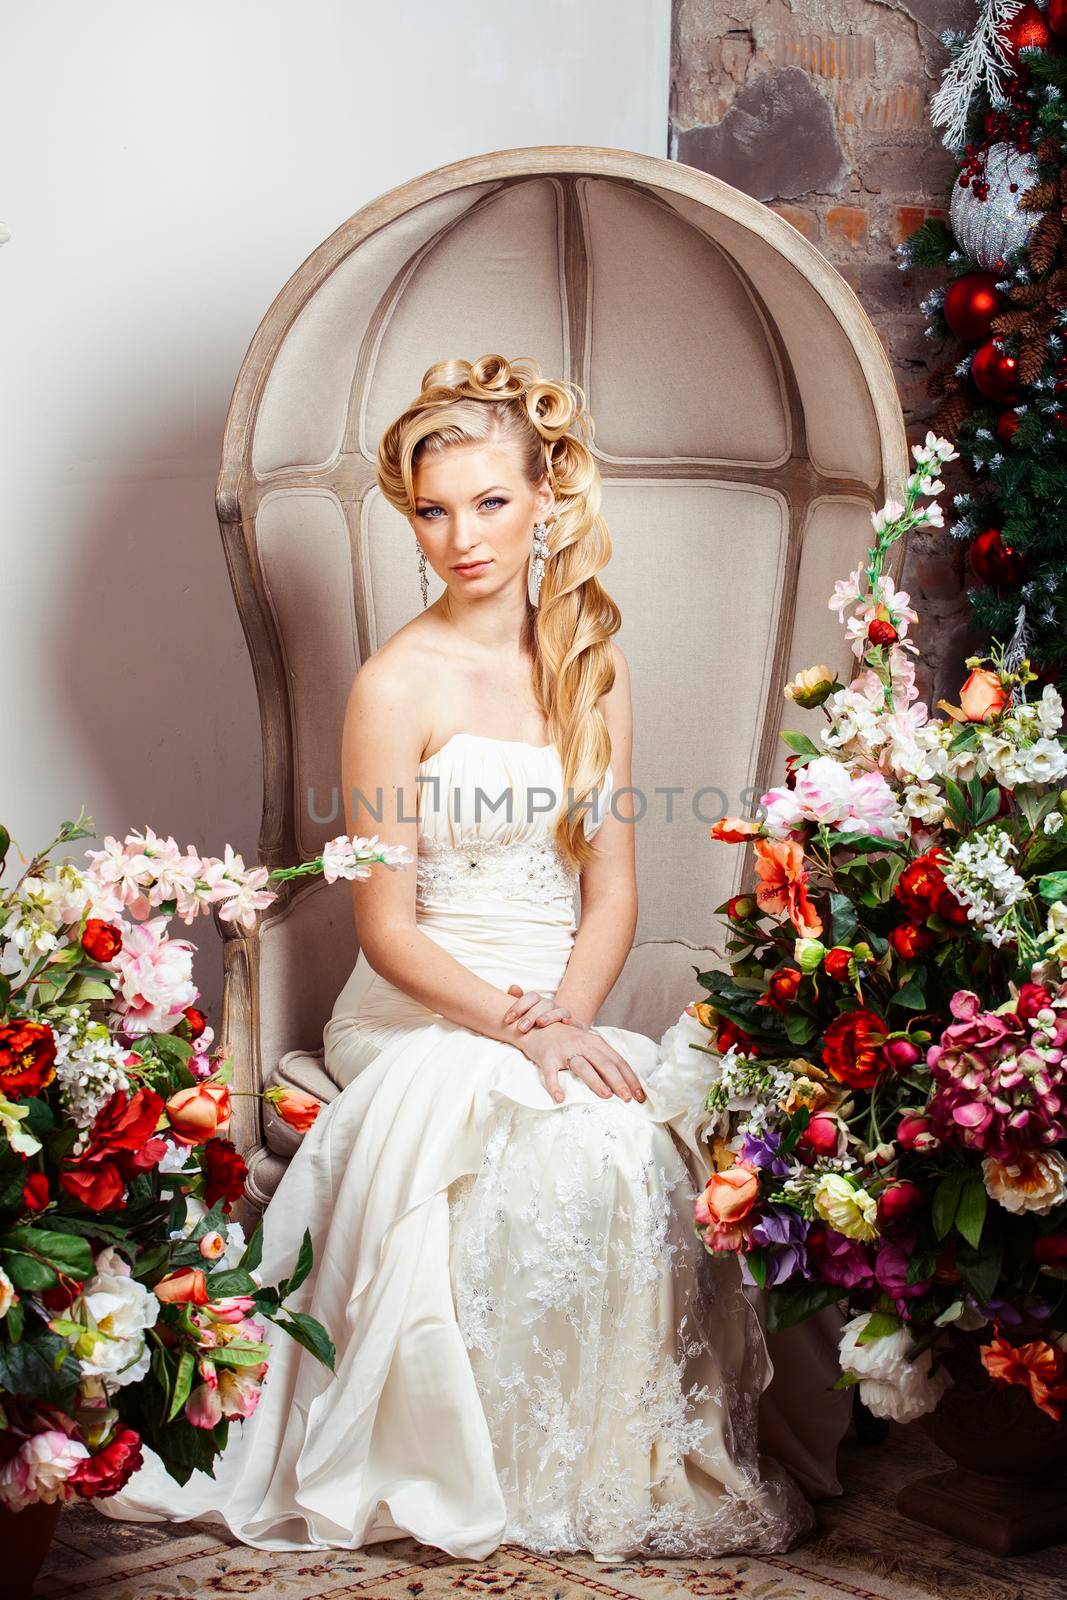 beauty young bride alone in luxury vintage interior with a lot of flowers, makeup and creative hairstyle close up